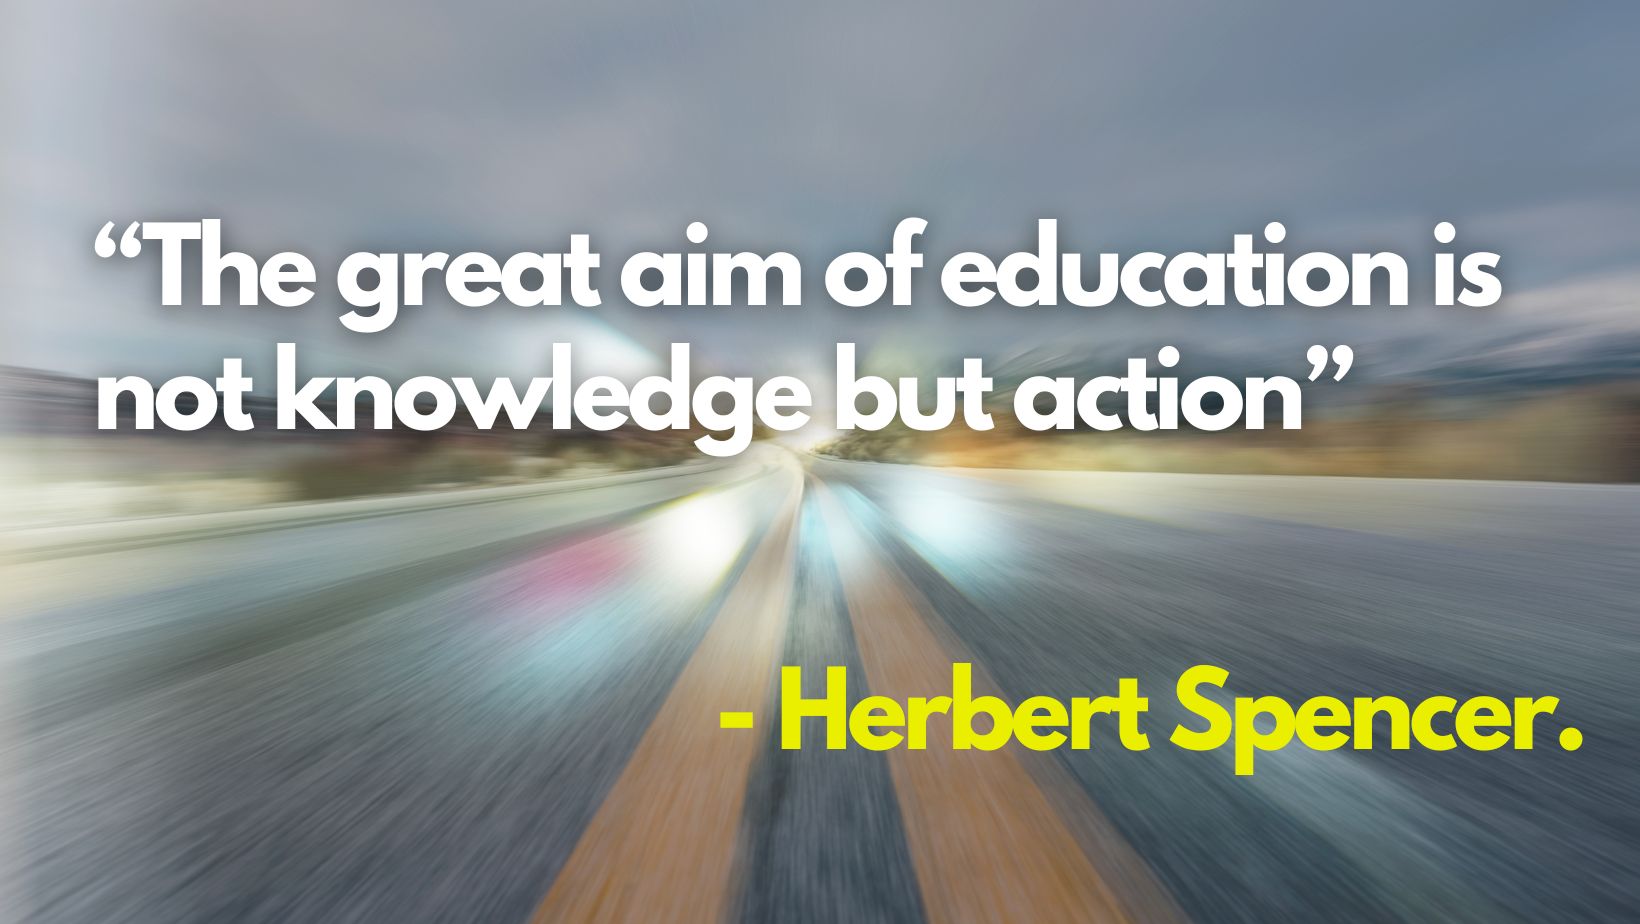 Best Education Quotes for Students